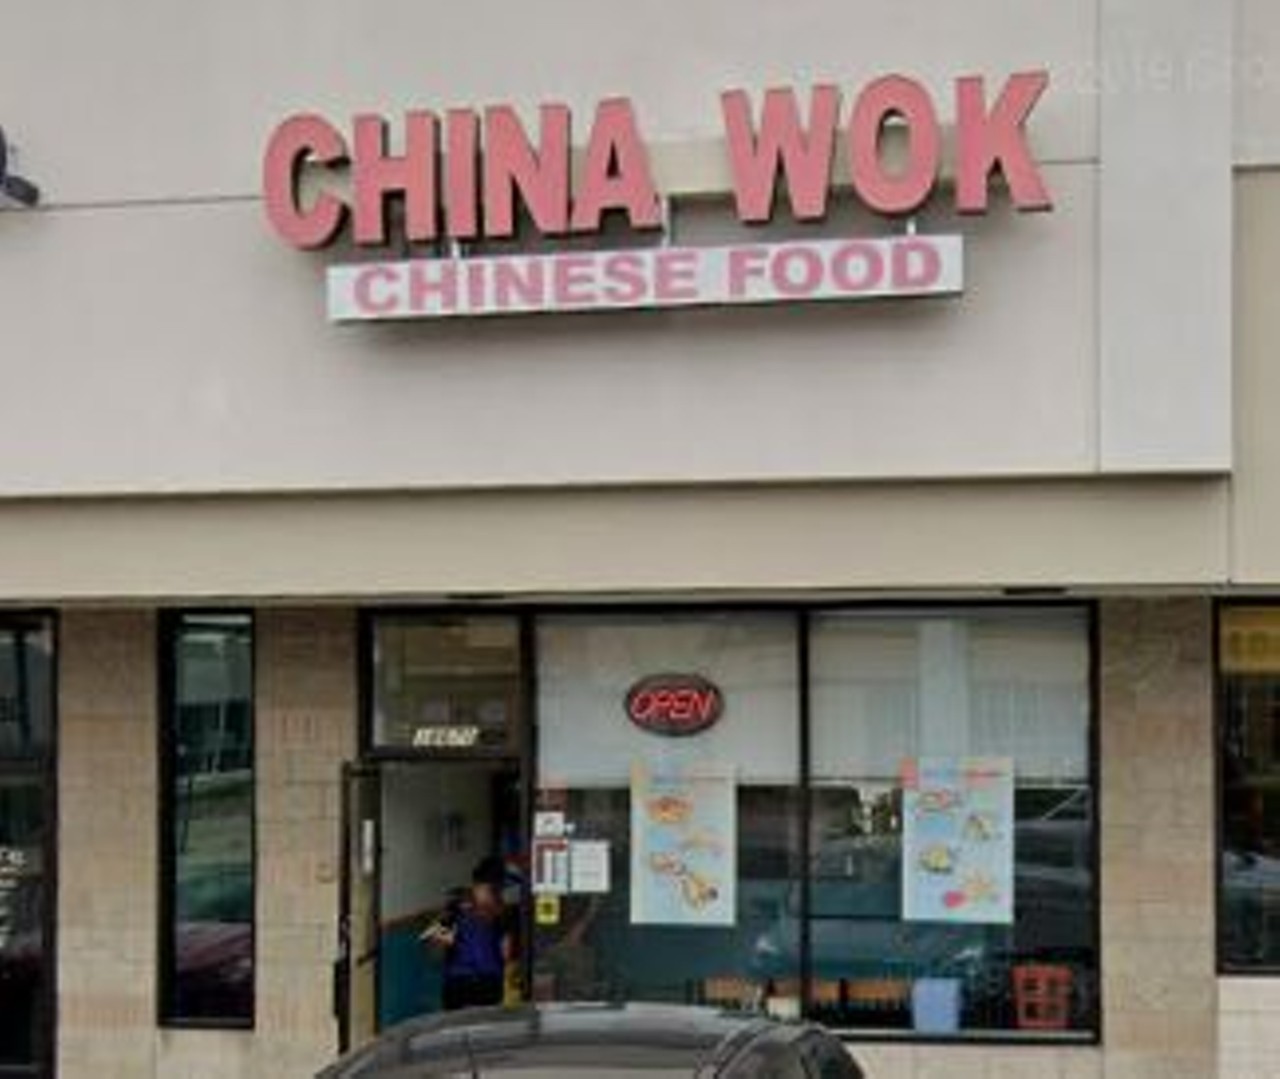 China Wok
18670 Livernois, Detroit; 313-864-8899; chineserestaurant.business.site
Like the cooking vessel its named after, China Wok serves up massive portions for a great price.
Photo via Google Maps